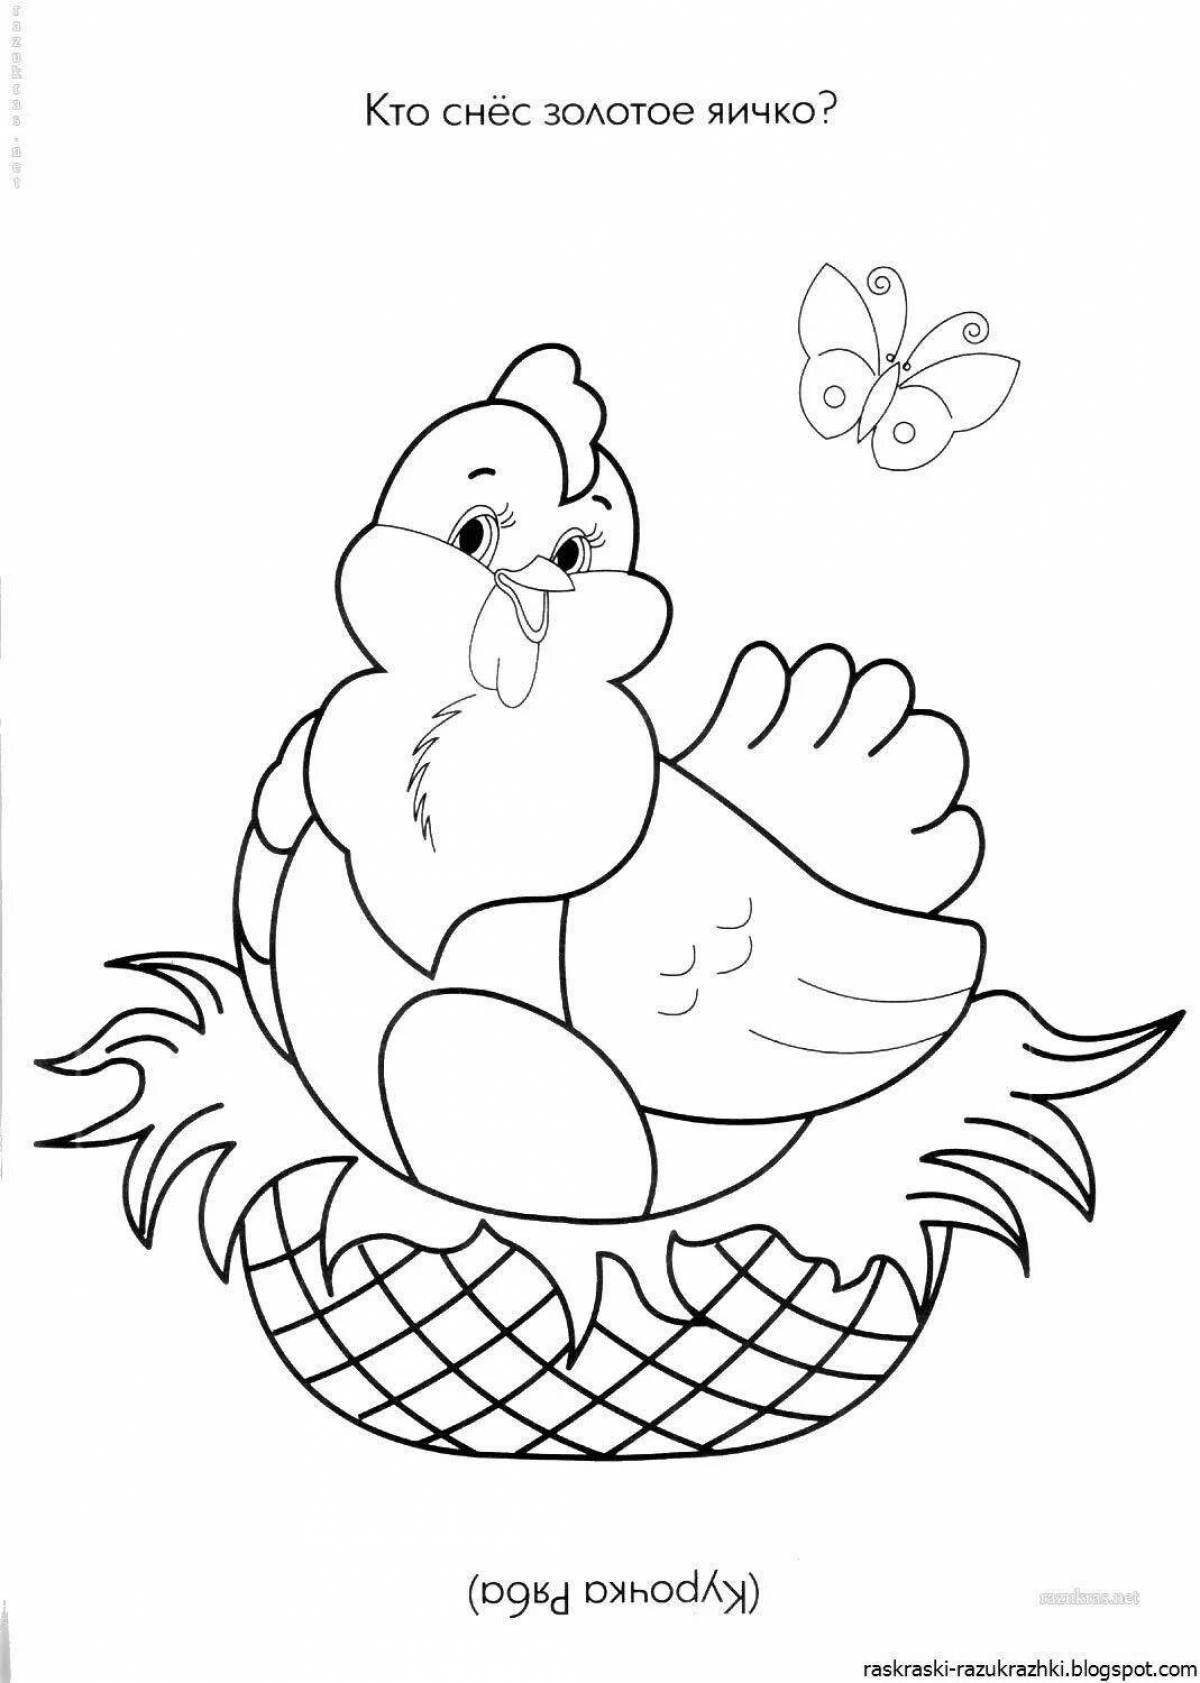 Incredible pre-k chick pockmarked coloring book